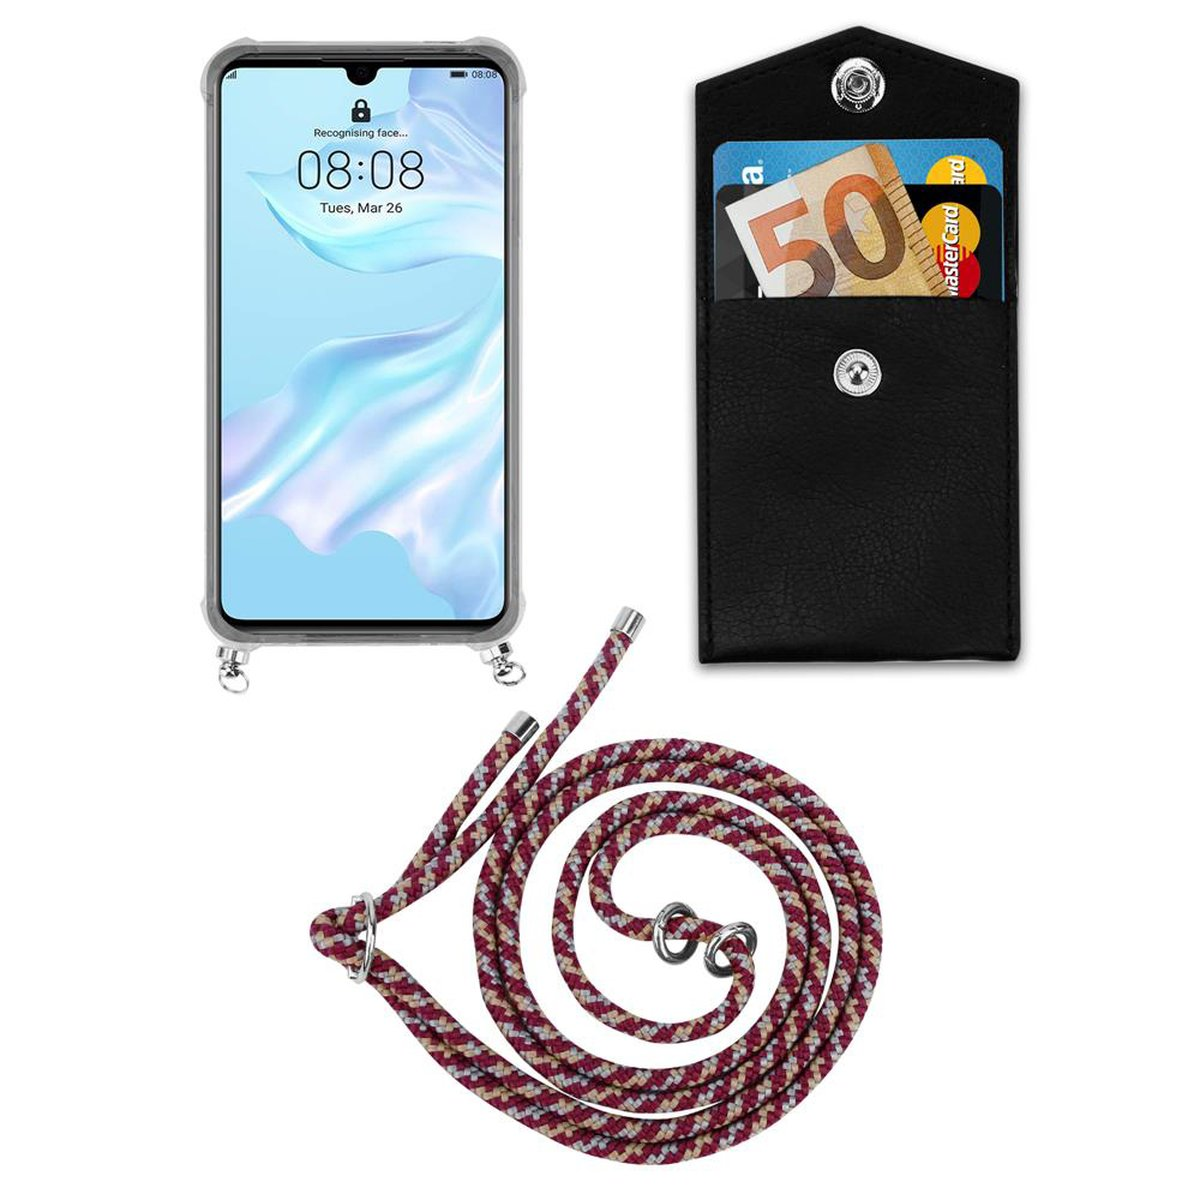 Ringen, GELB Huawei, WEIß mit Hülle, abnehmbarer P30, Kette Silber CADORABO Backcover, Kordel und Band Handy ROT